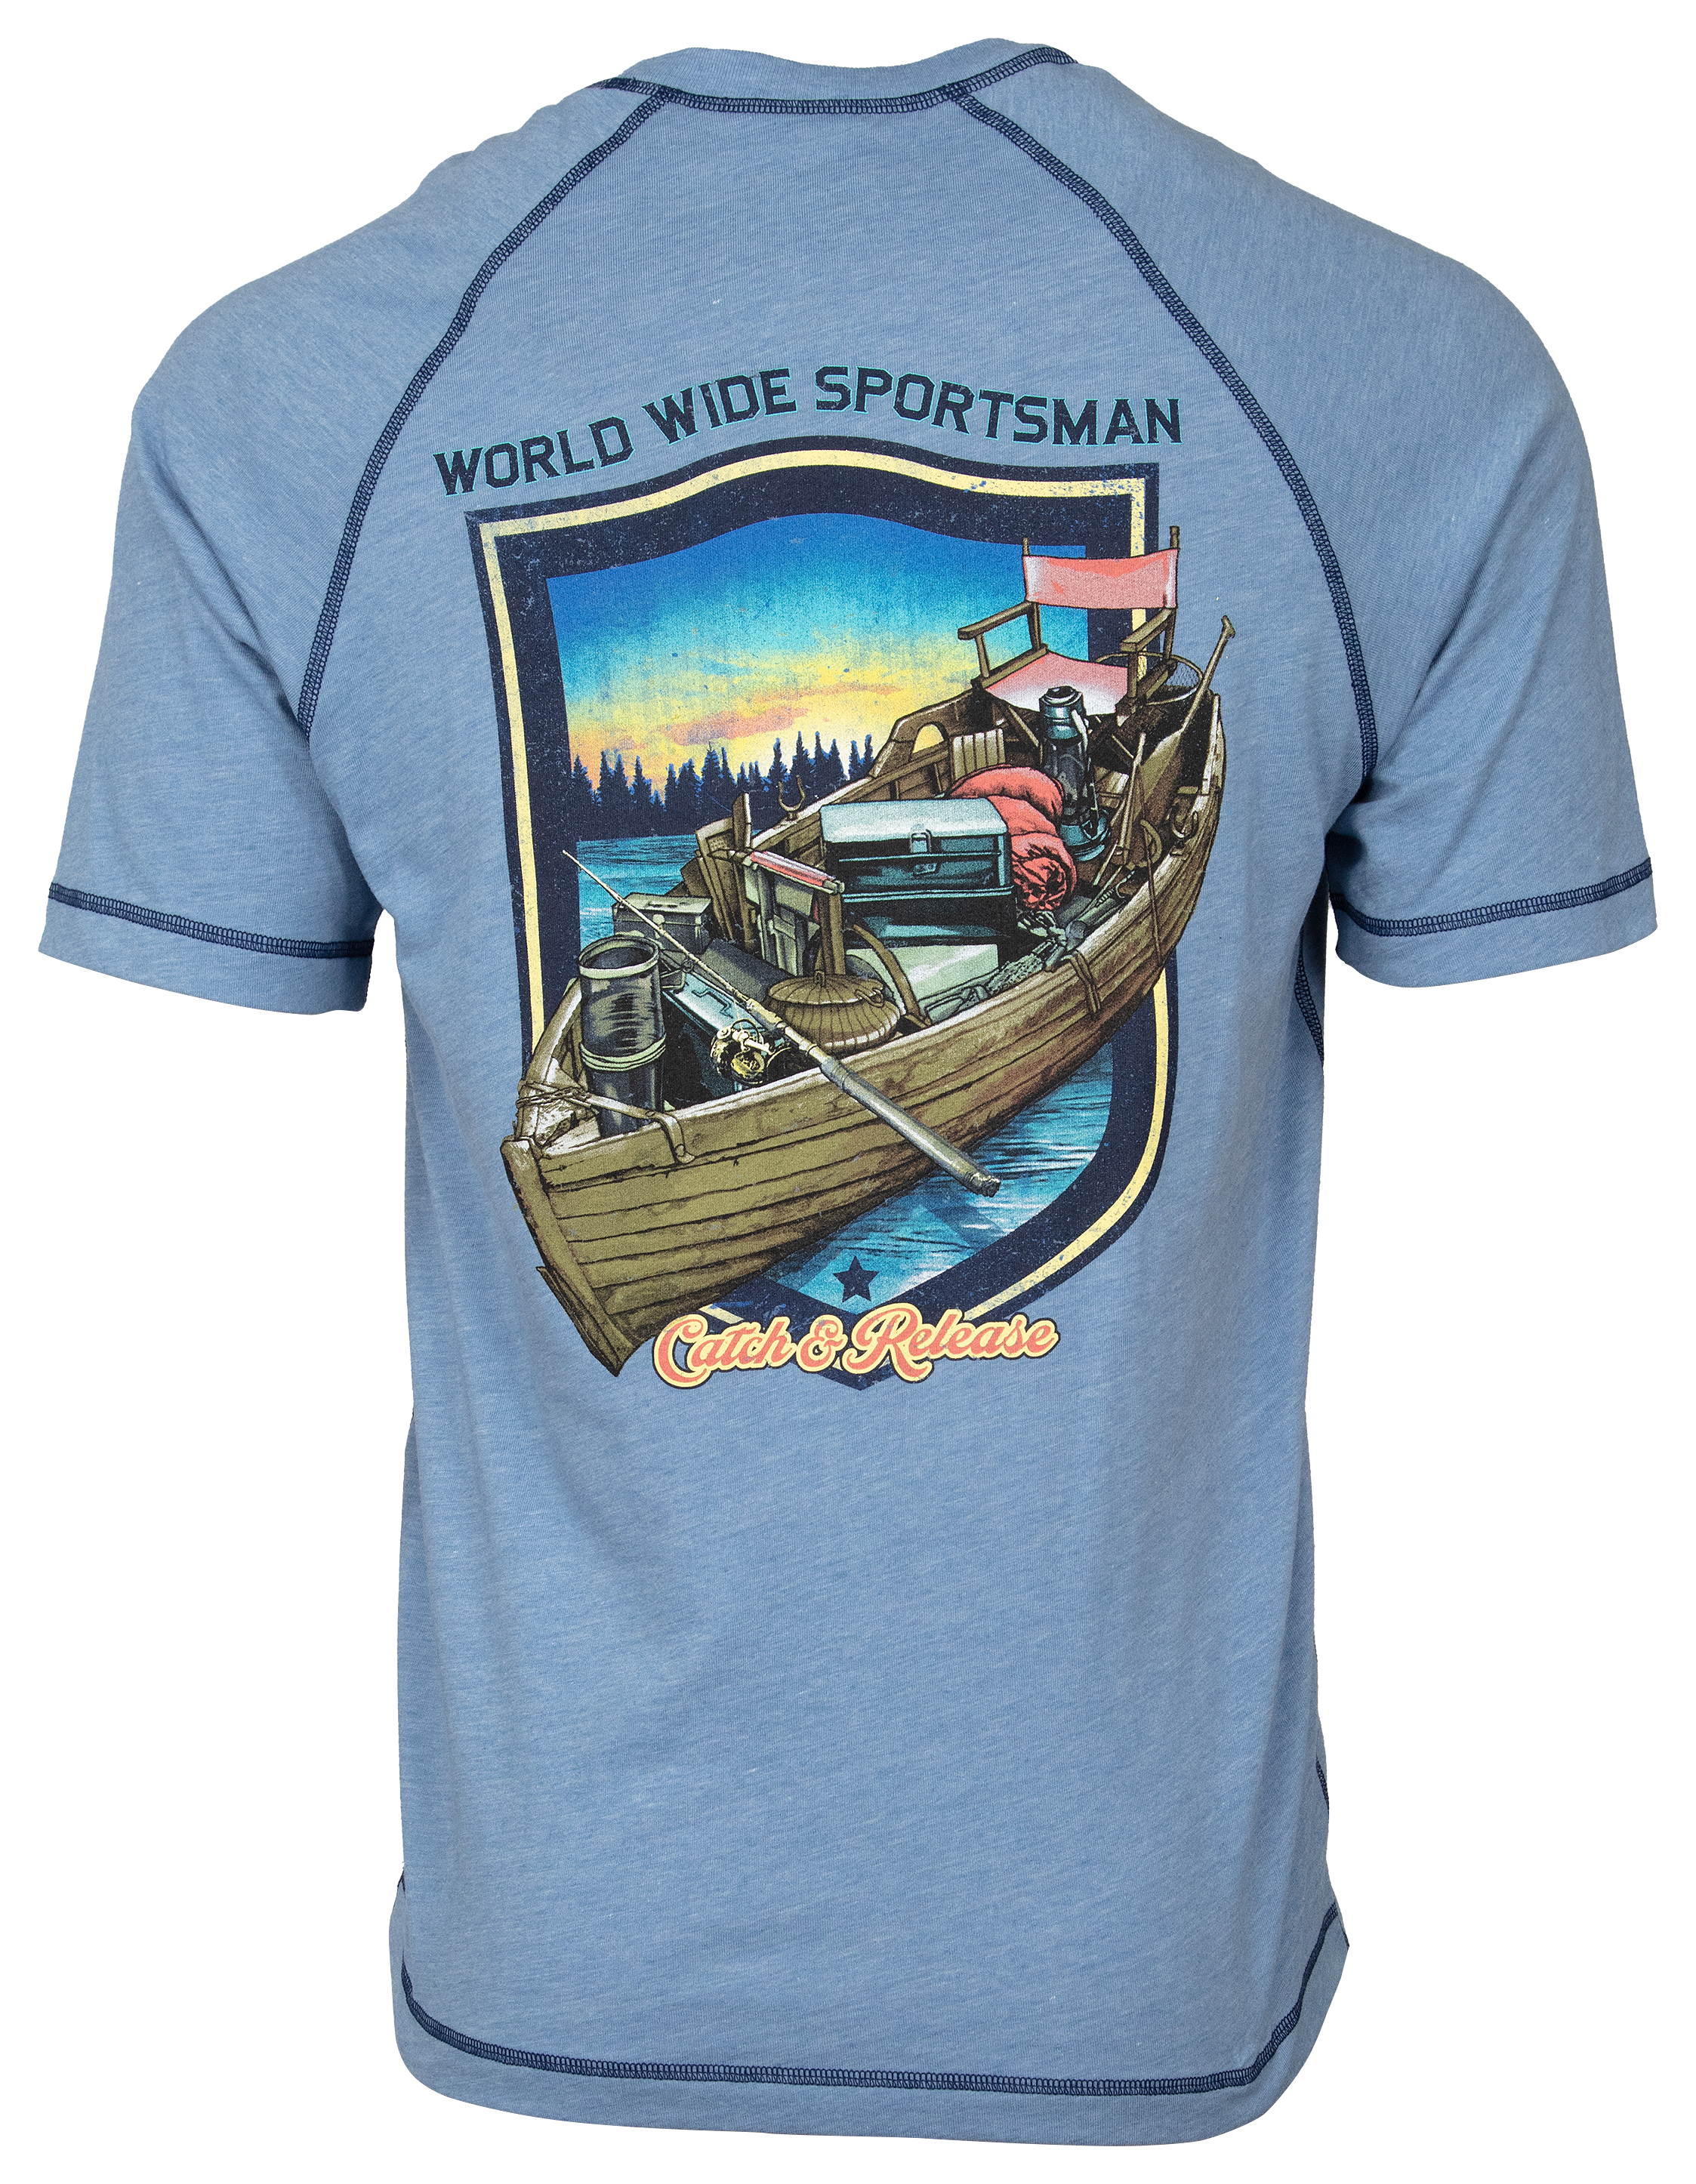 World Wide Sportsman Vintage Catch and Release Short-Sleeve Crew Neck T-Shirt for Men